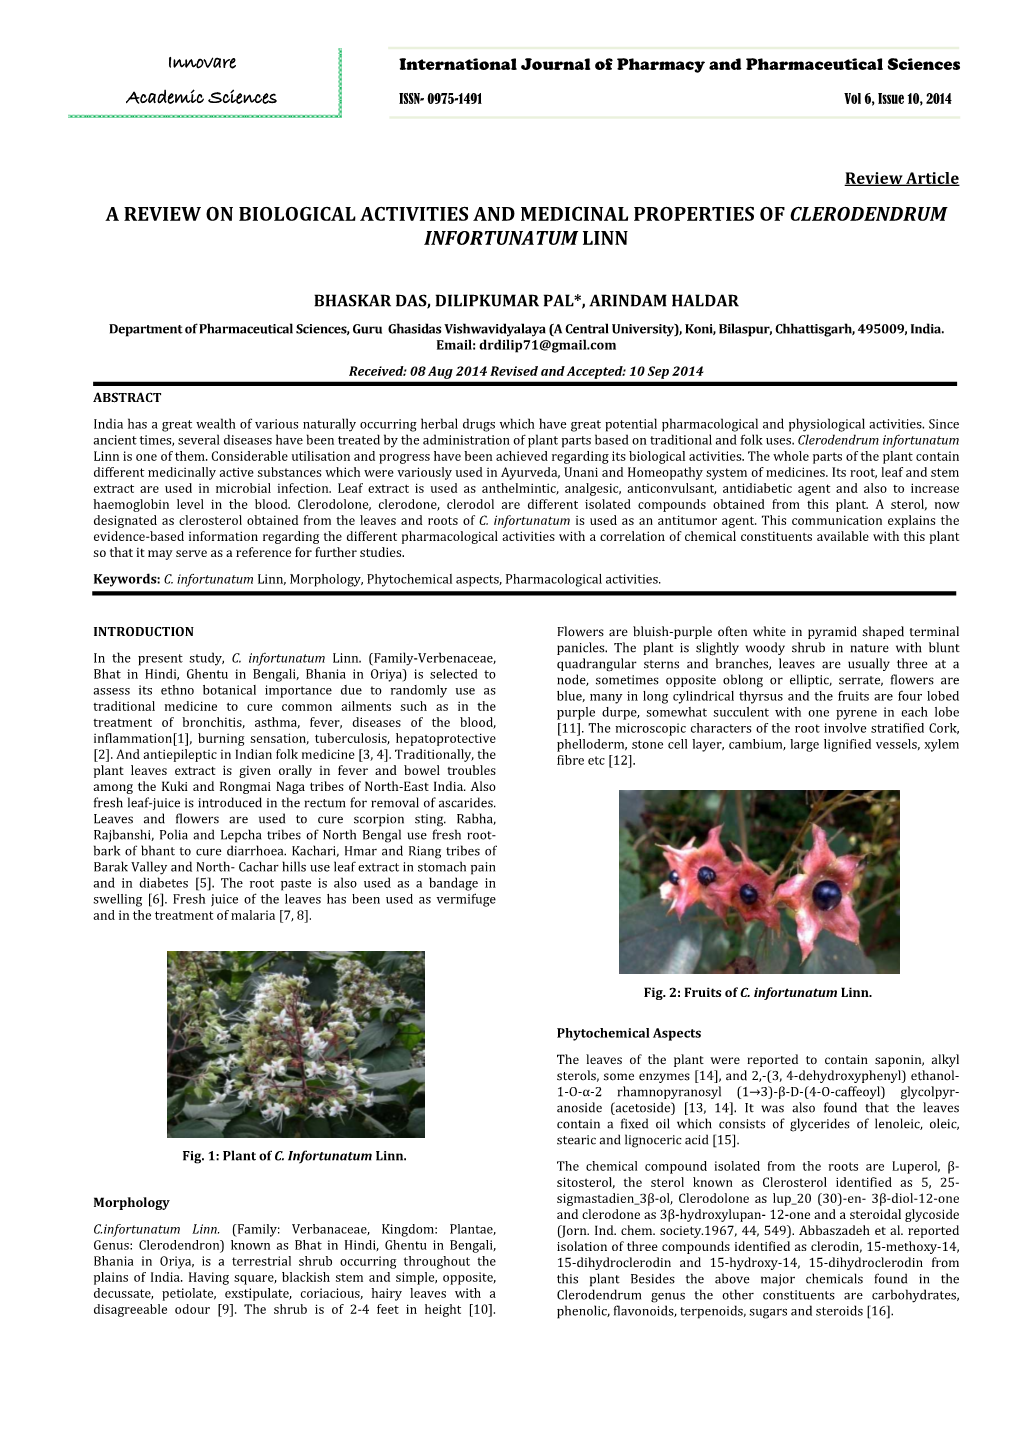 A Review on Biological Activities and Medicinal Properties of Clerodendrum Infortunatum Linn